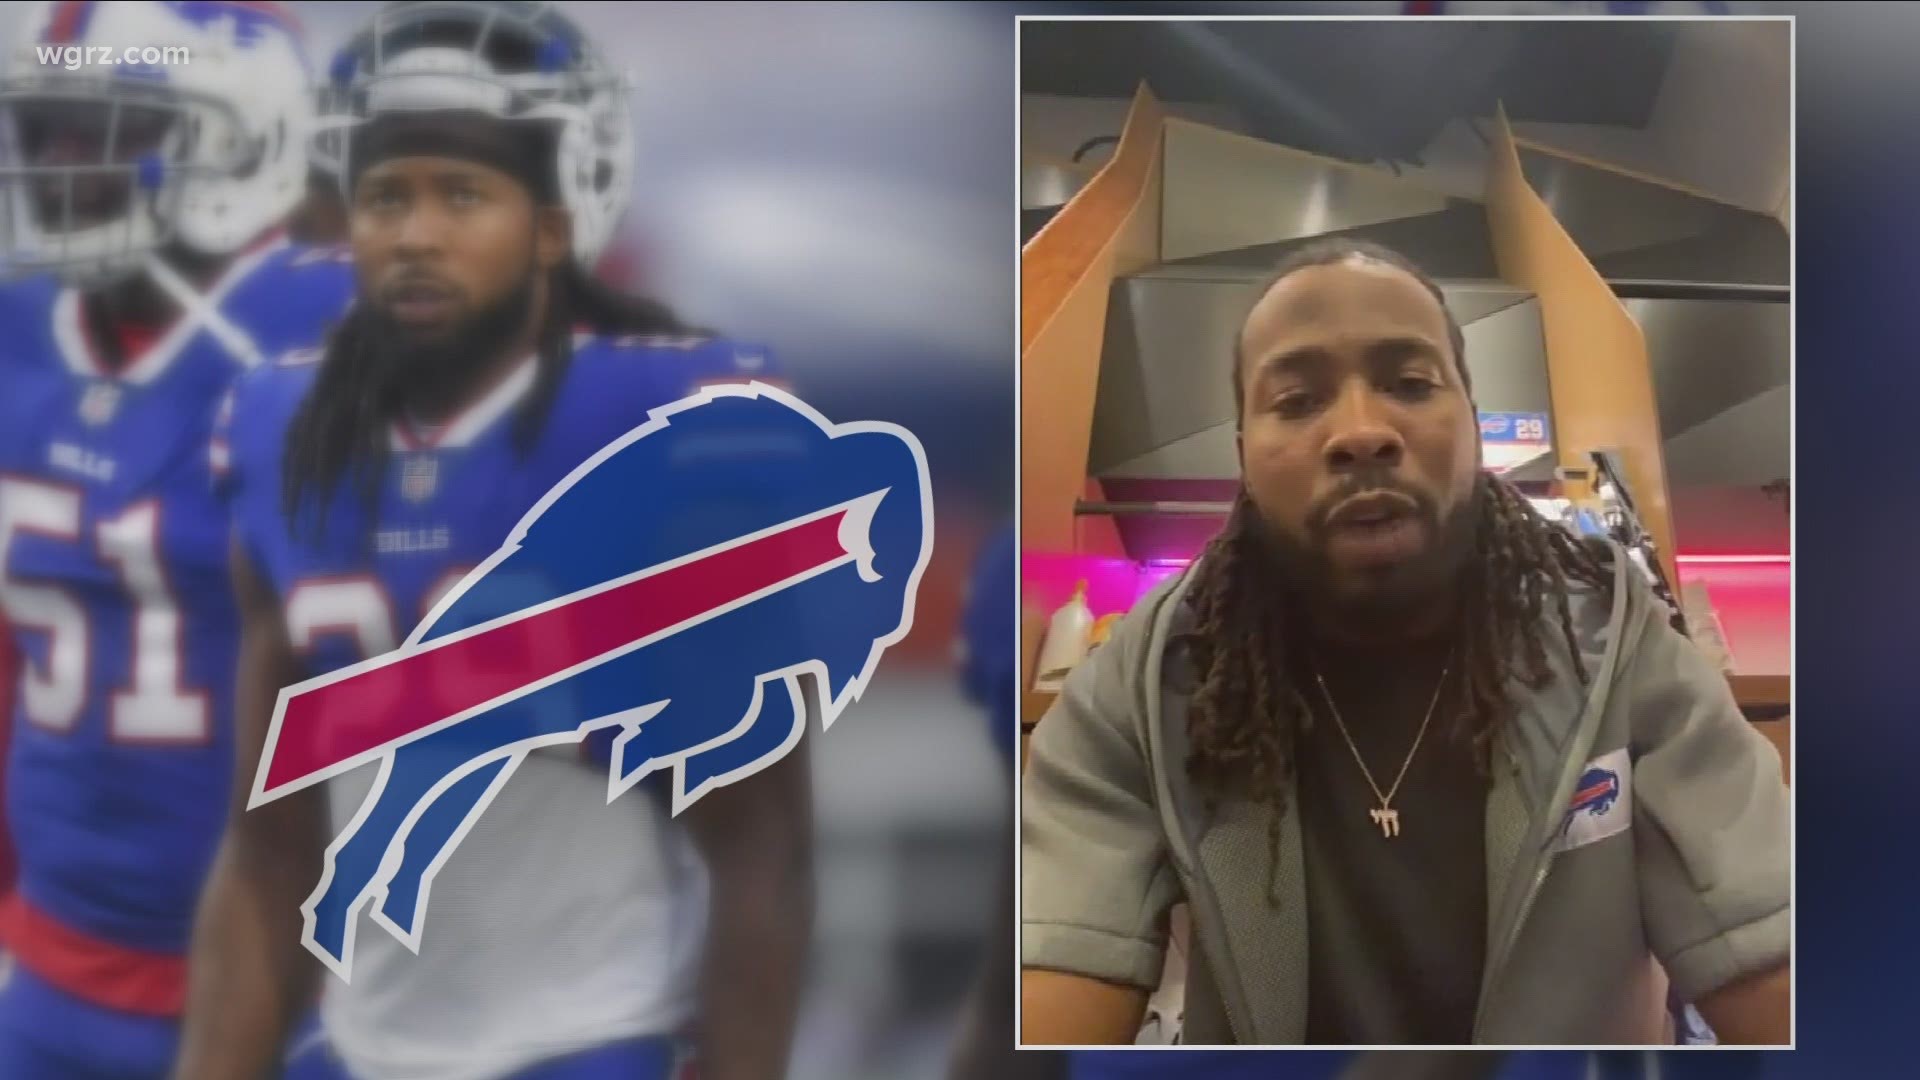 After growing up and watching some of his family help others, he's ready to do the same in Buffalo.